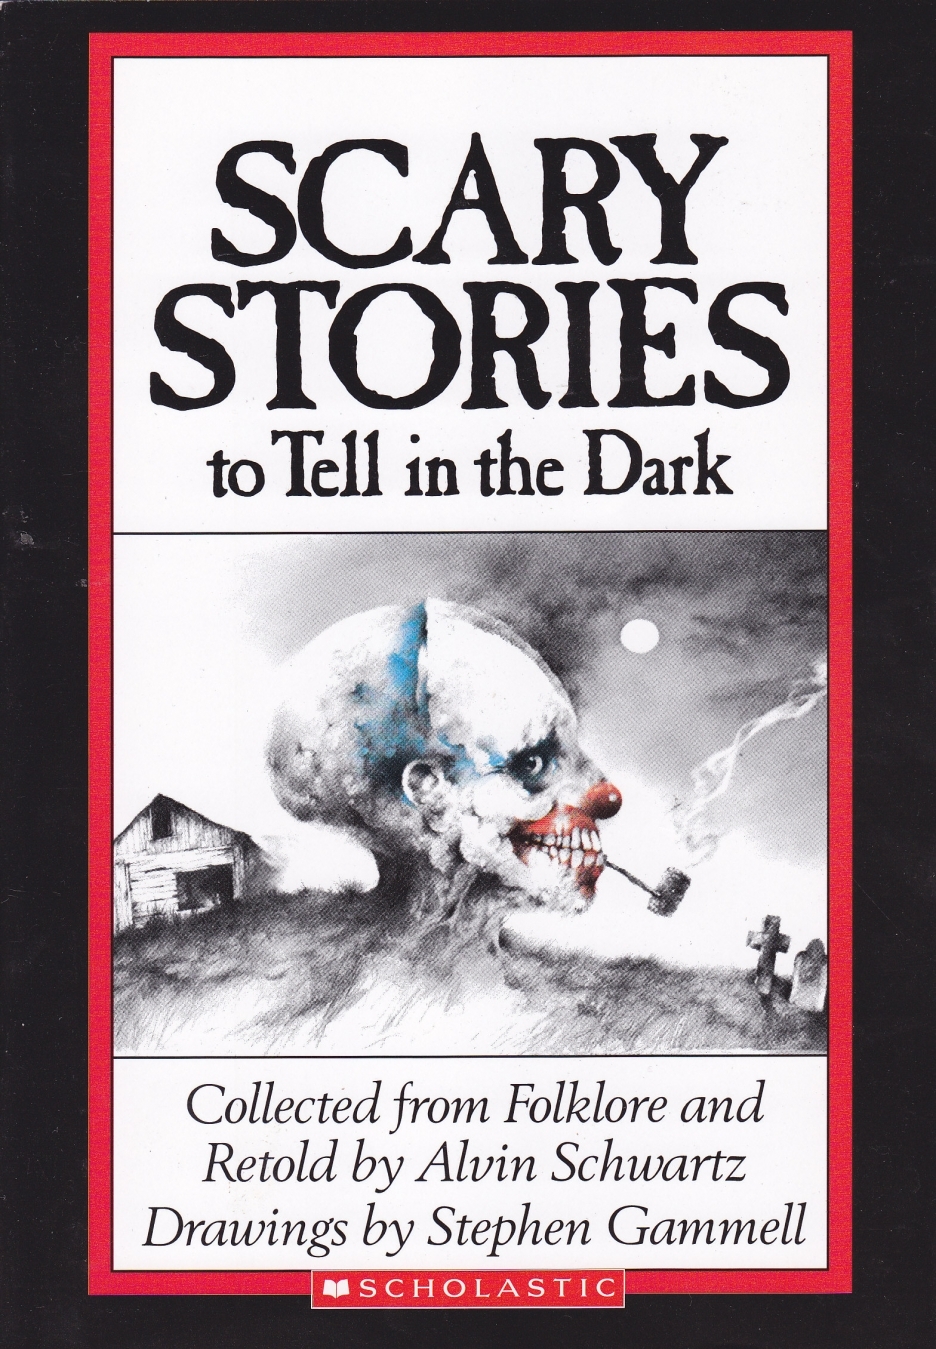 Saw Scribes Working on Scary Stories to Tell in the Dark